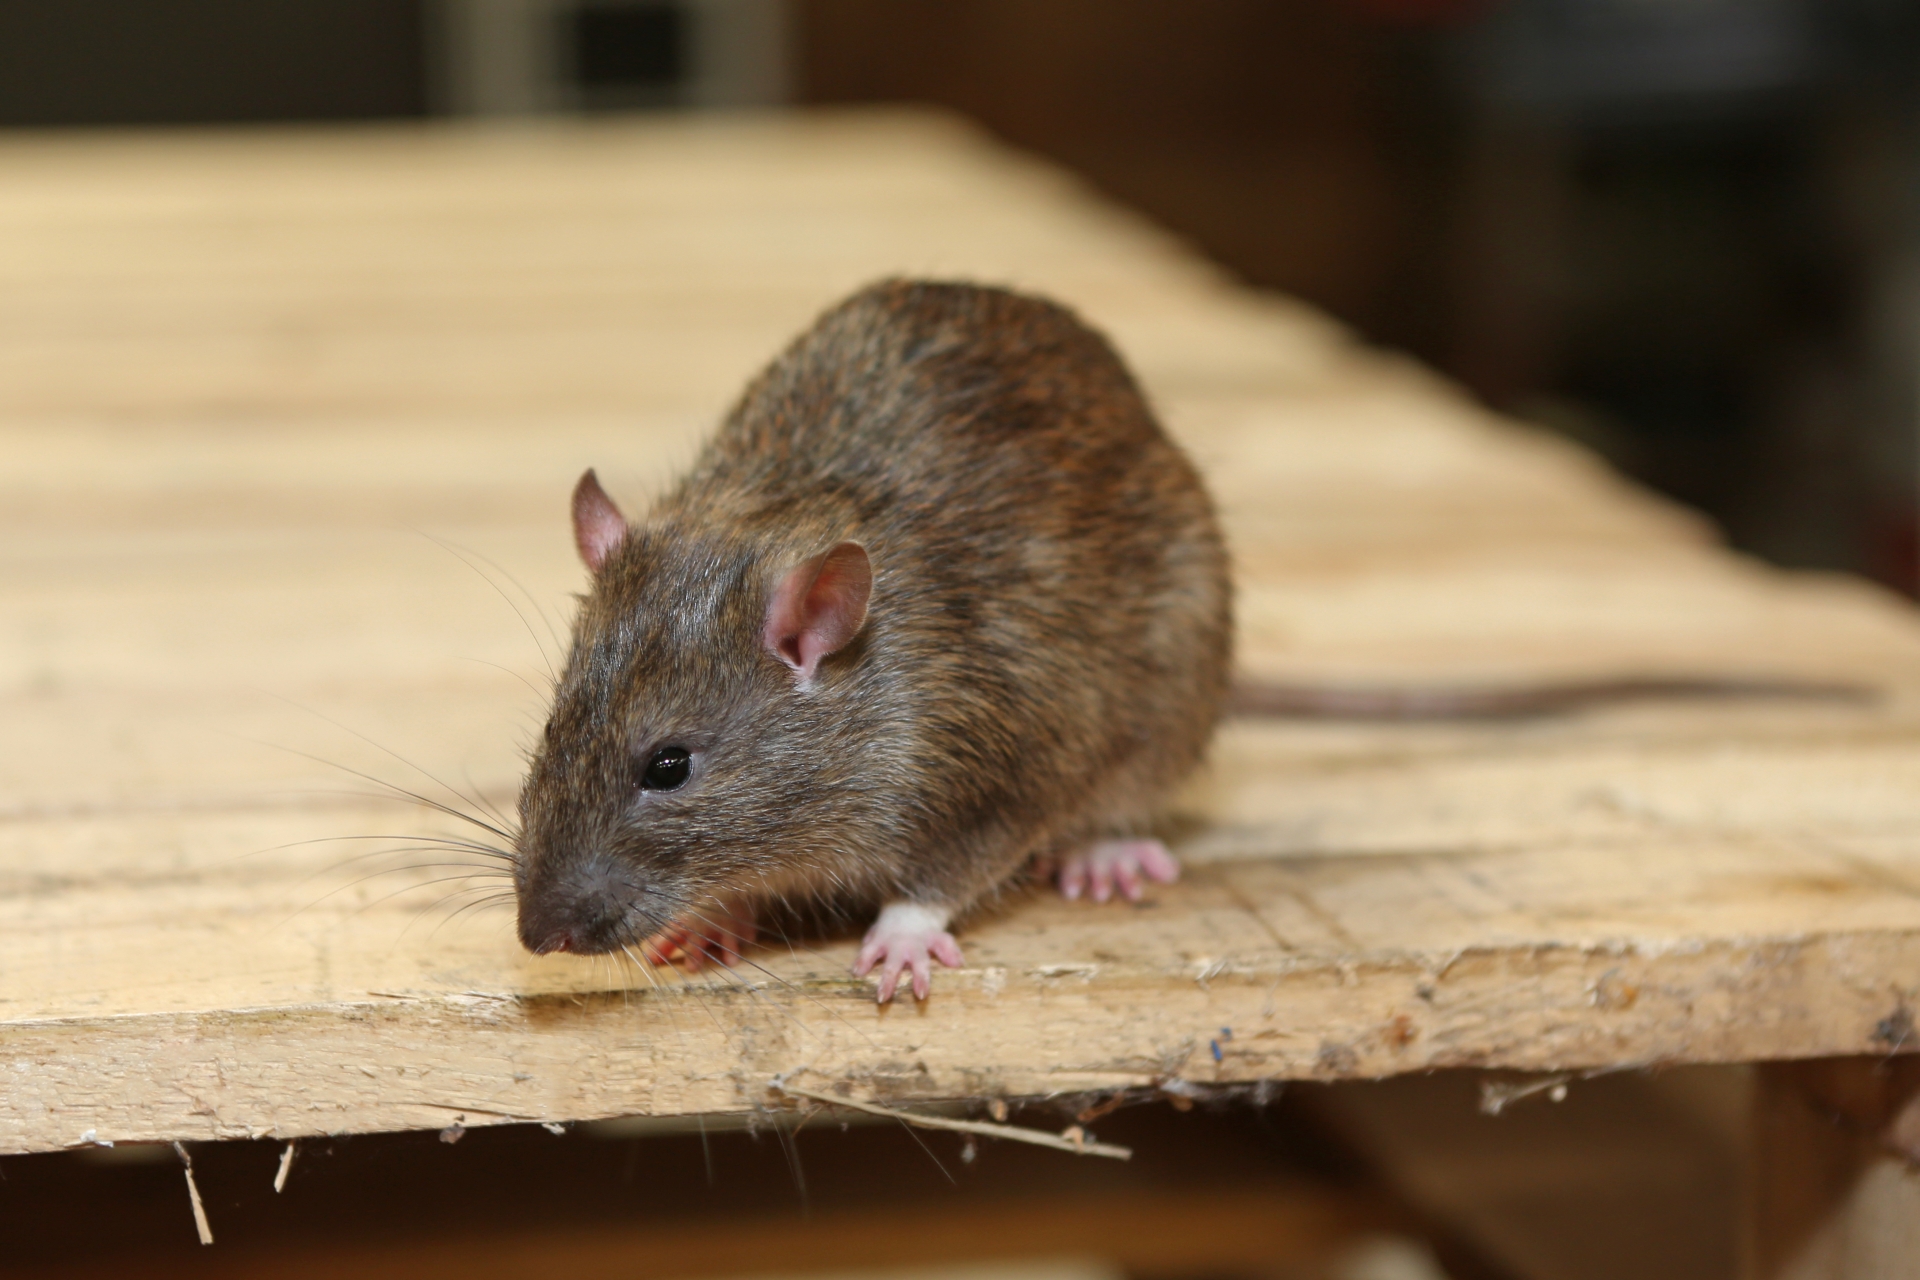 Rat Infestation, Pest Control in Ealing, W5. Call Now 020 8166 9746